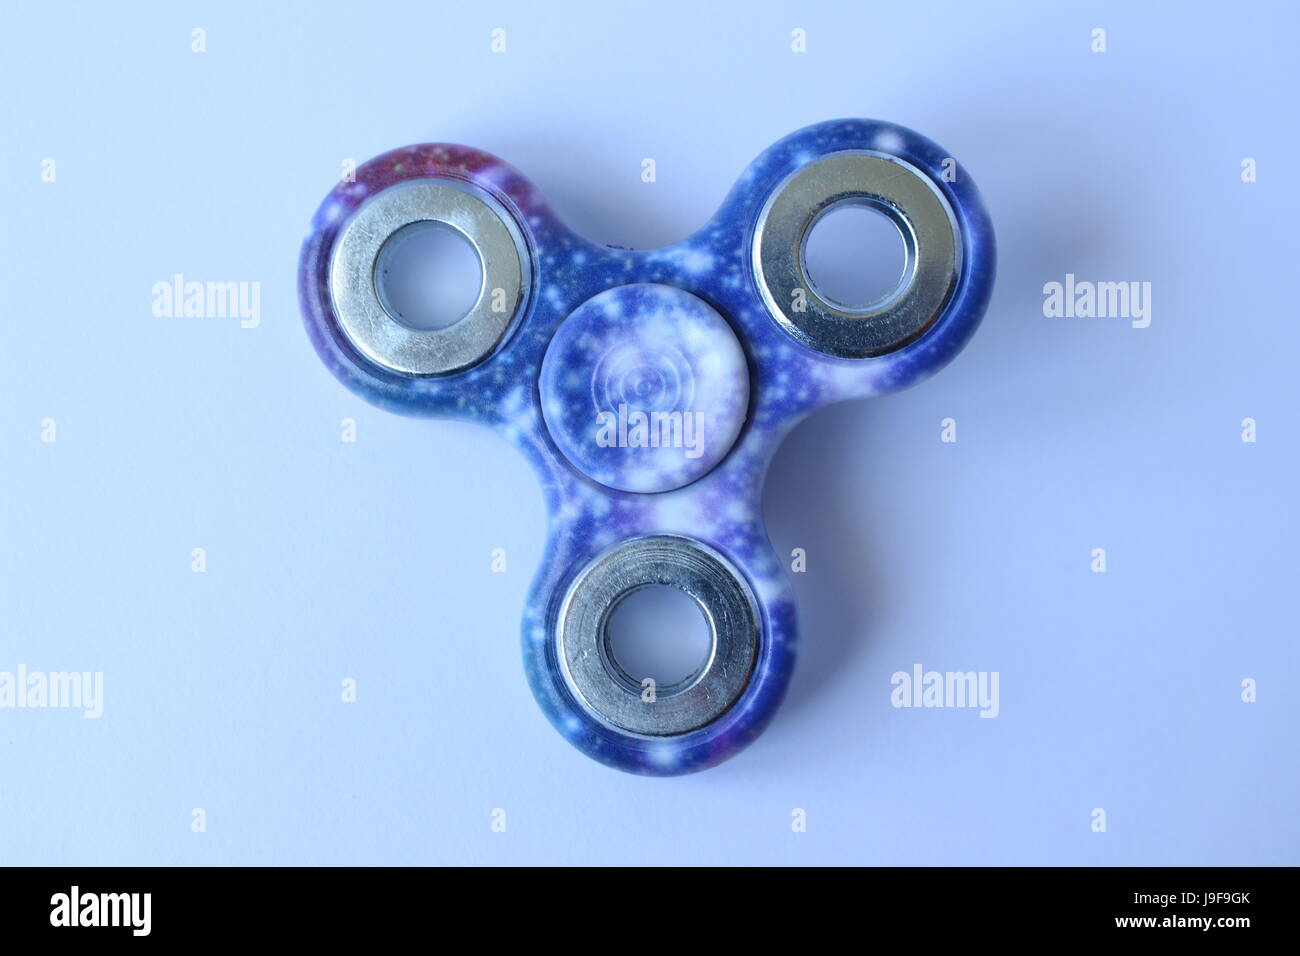 Toy stress spinner hand for child and adult colorful Stock Photo